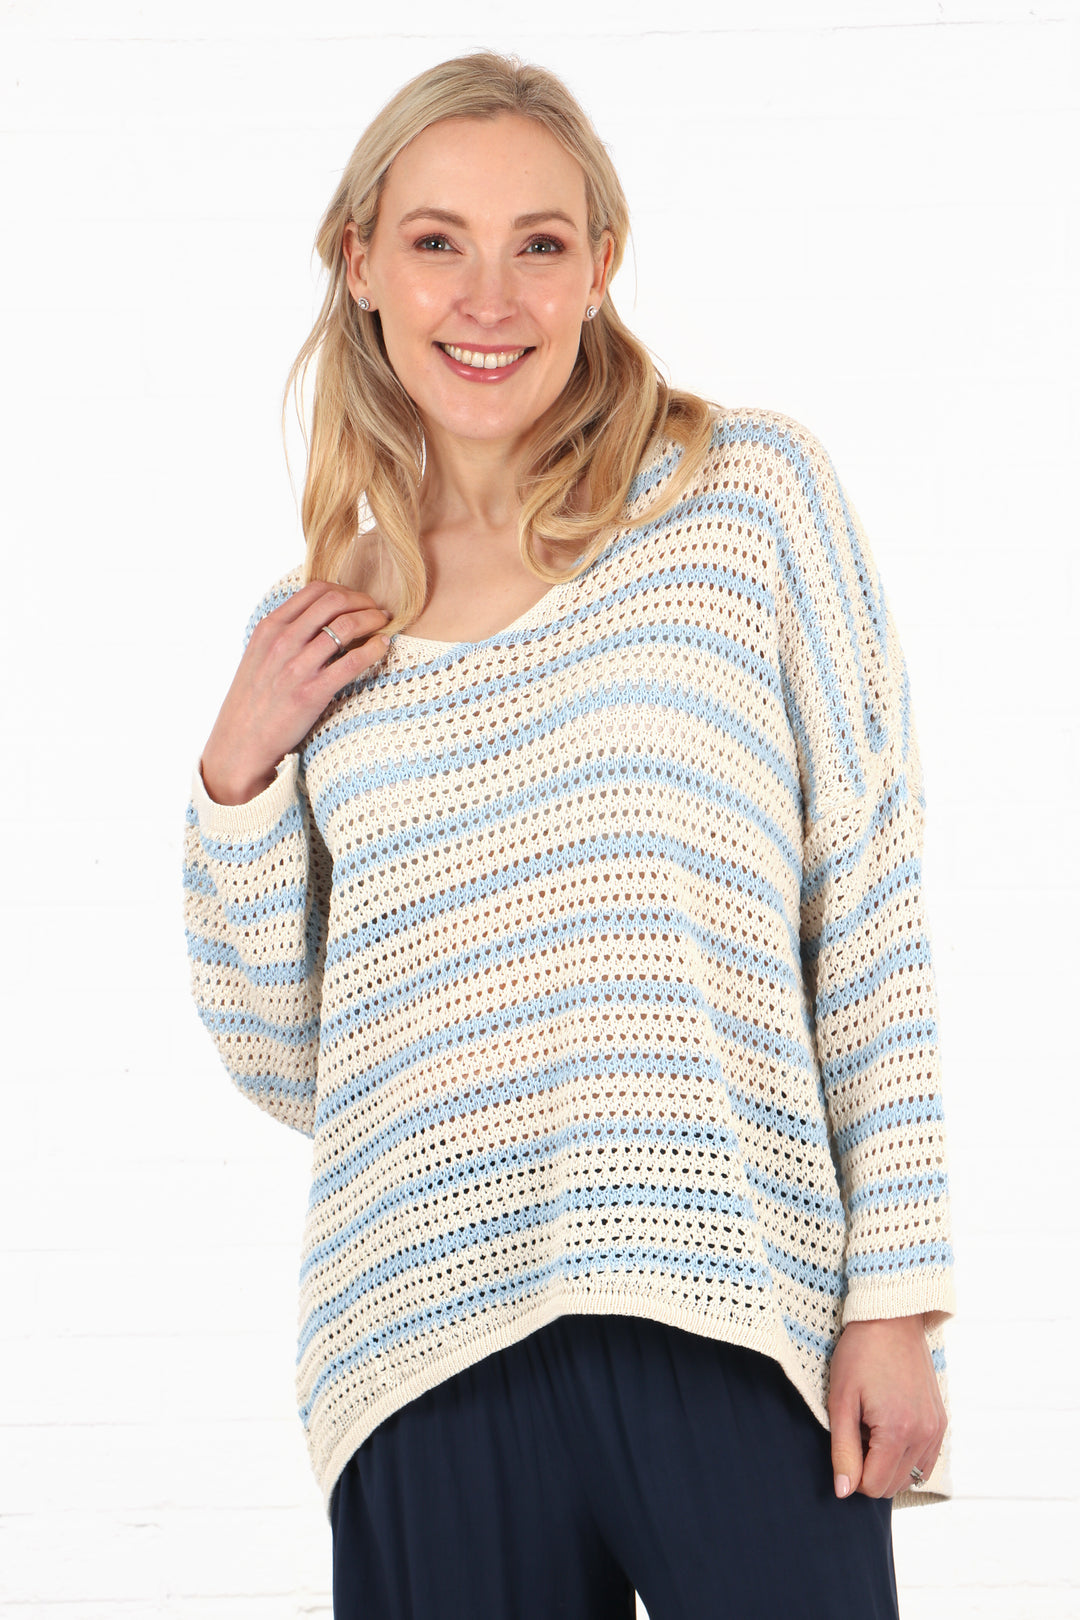 model wearing a cream and light blue striped cotton open knit jumper with long sleeves and a v-neck